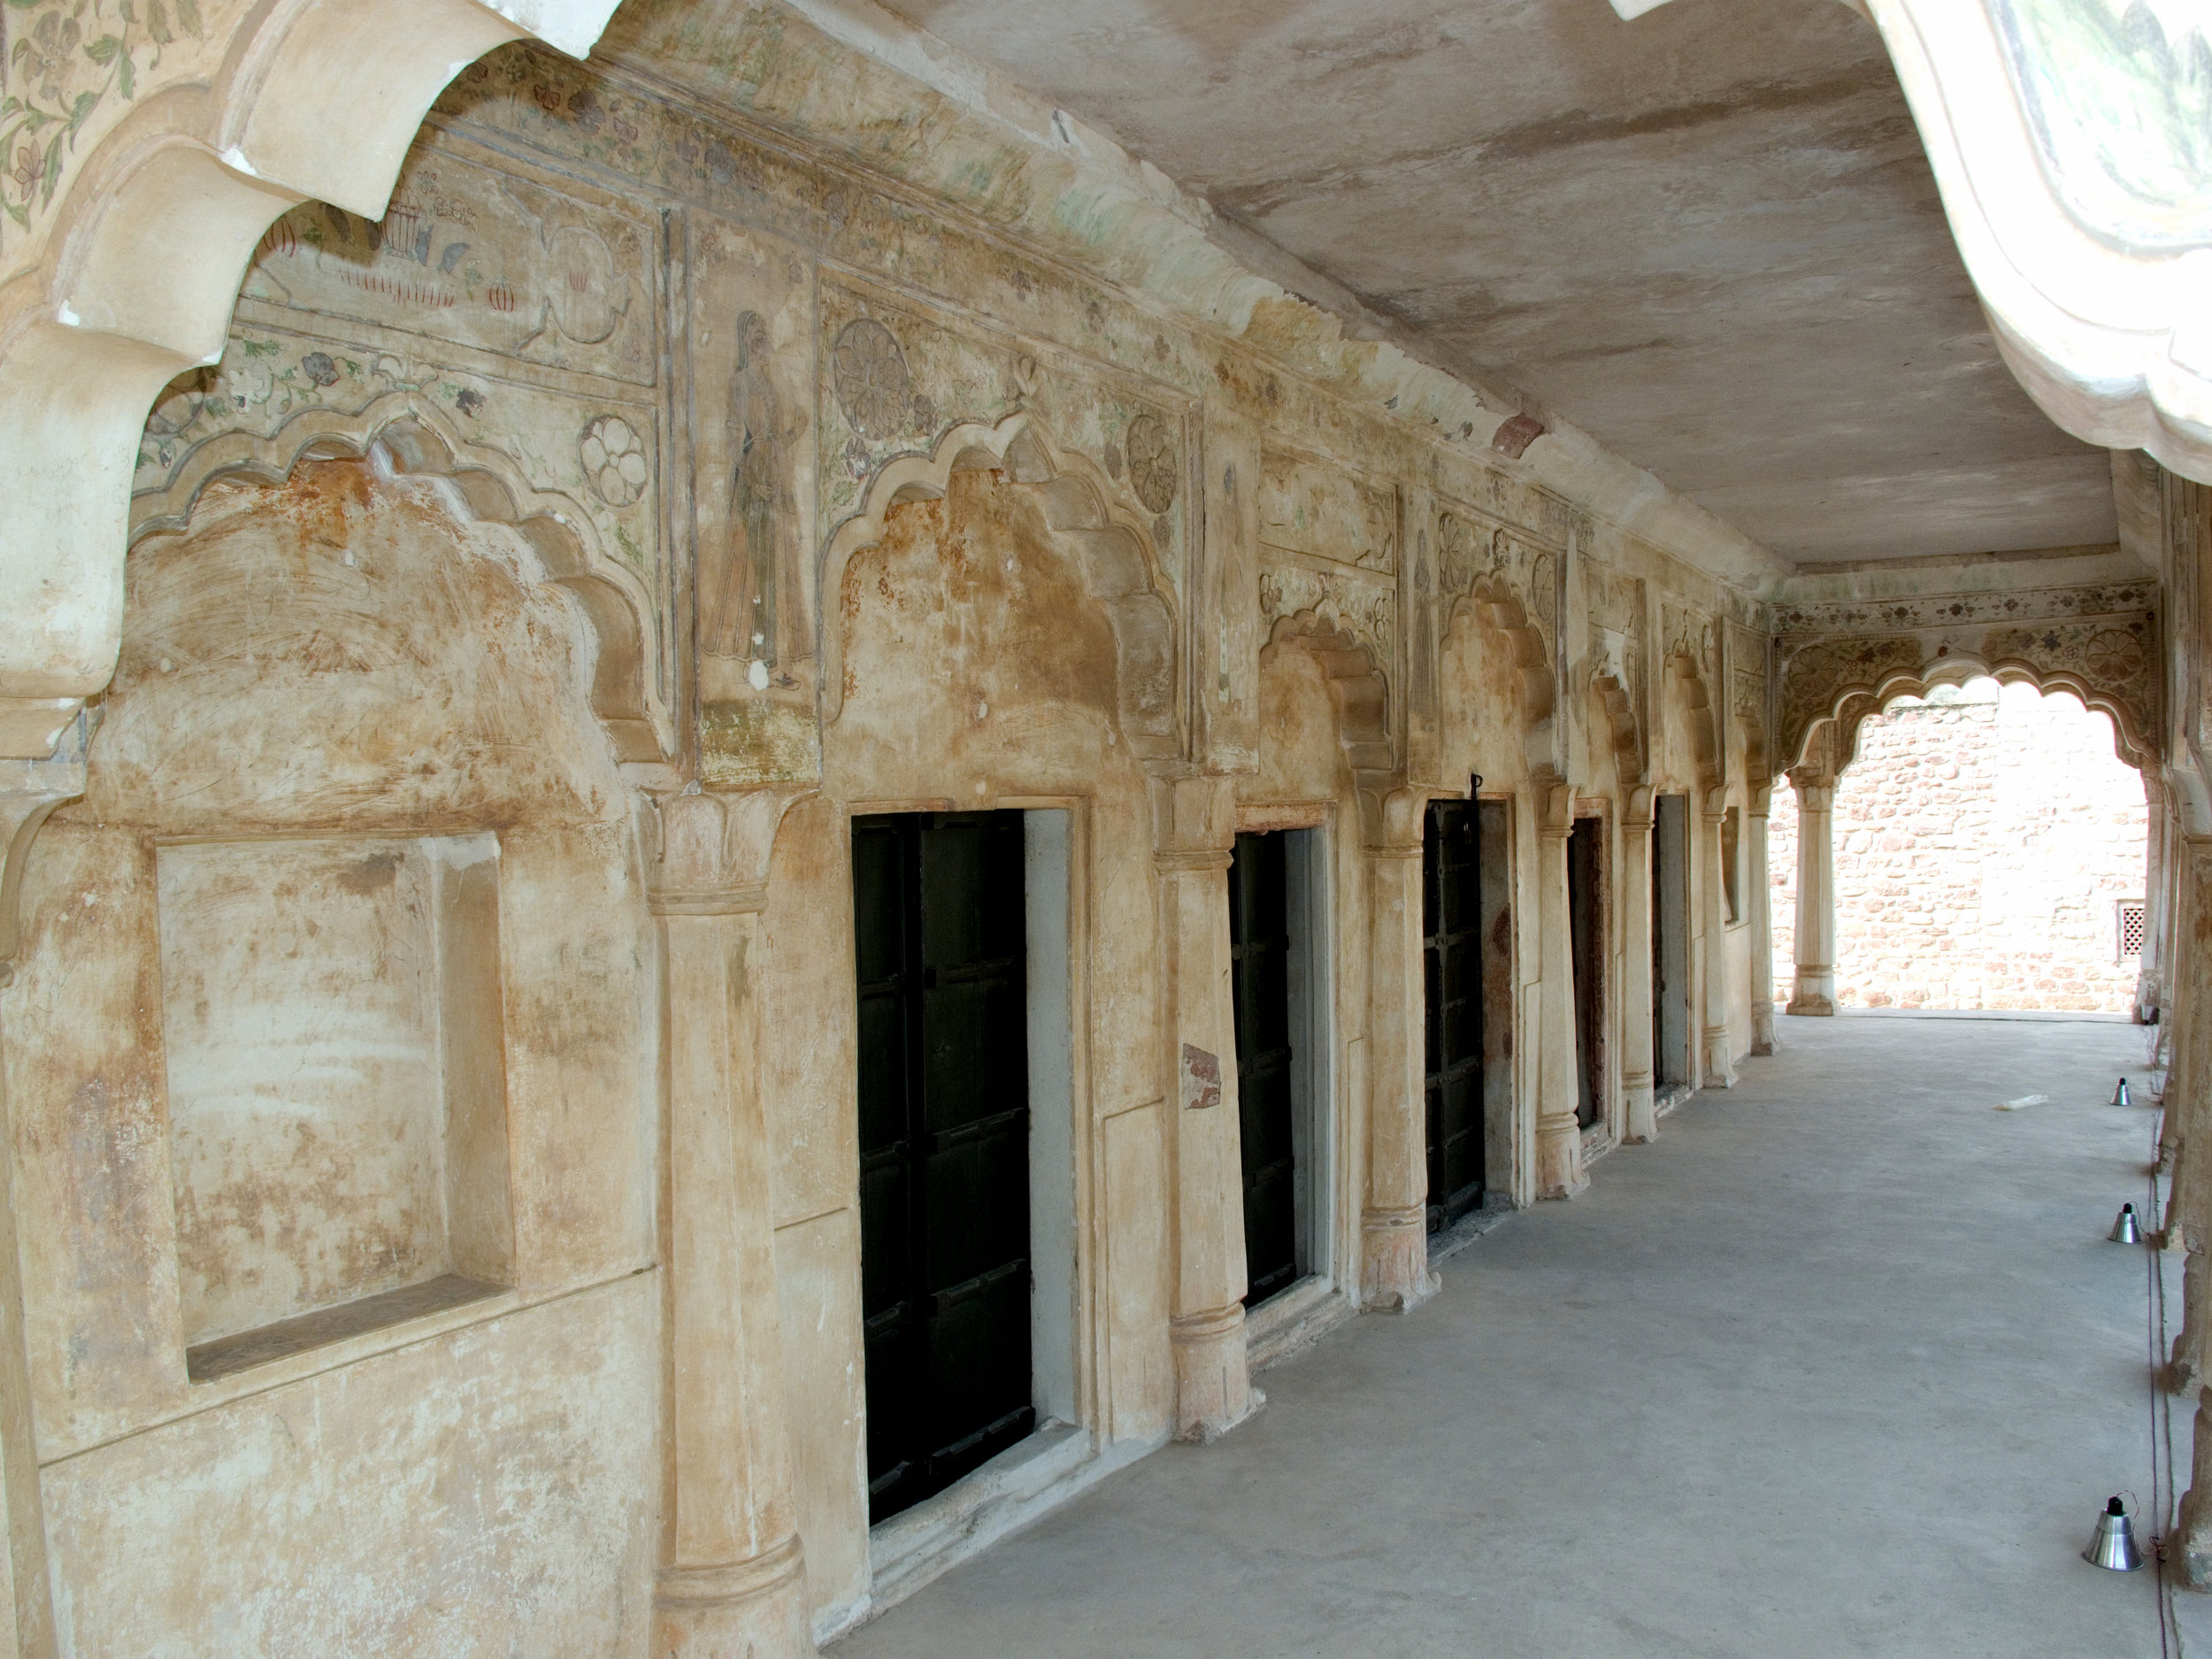  The plastered and painted exterior walls of the Sheesh Mahal.  Image © Courtauld CWPD 